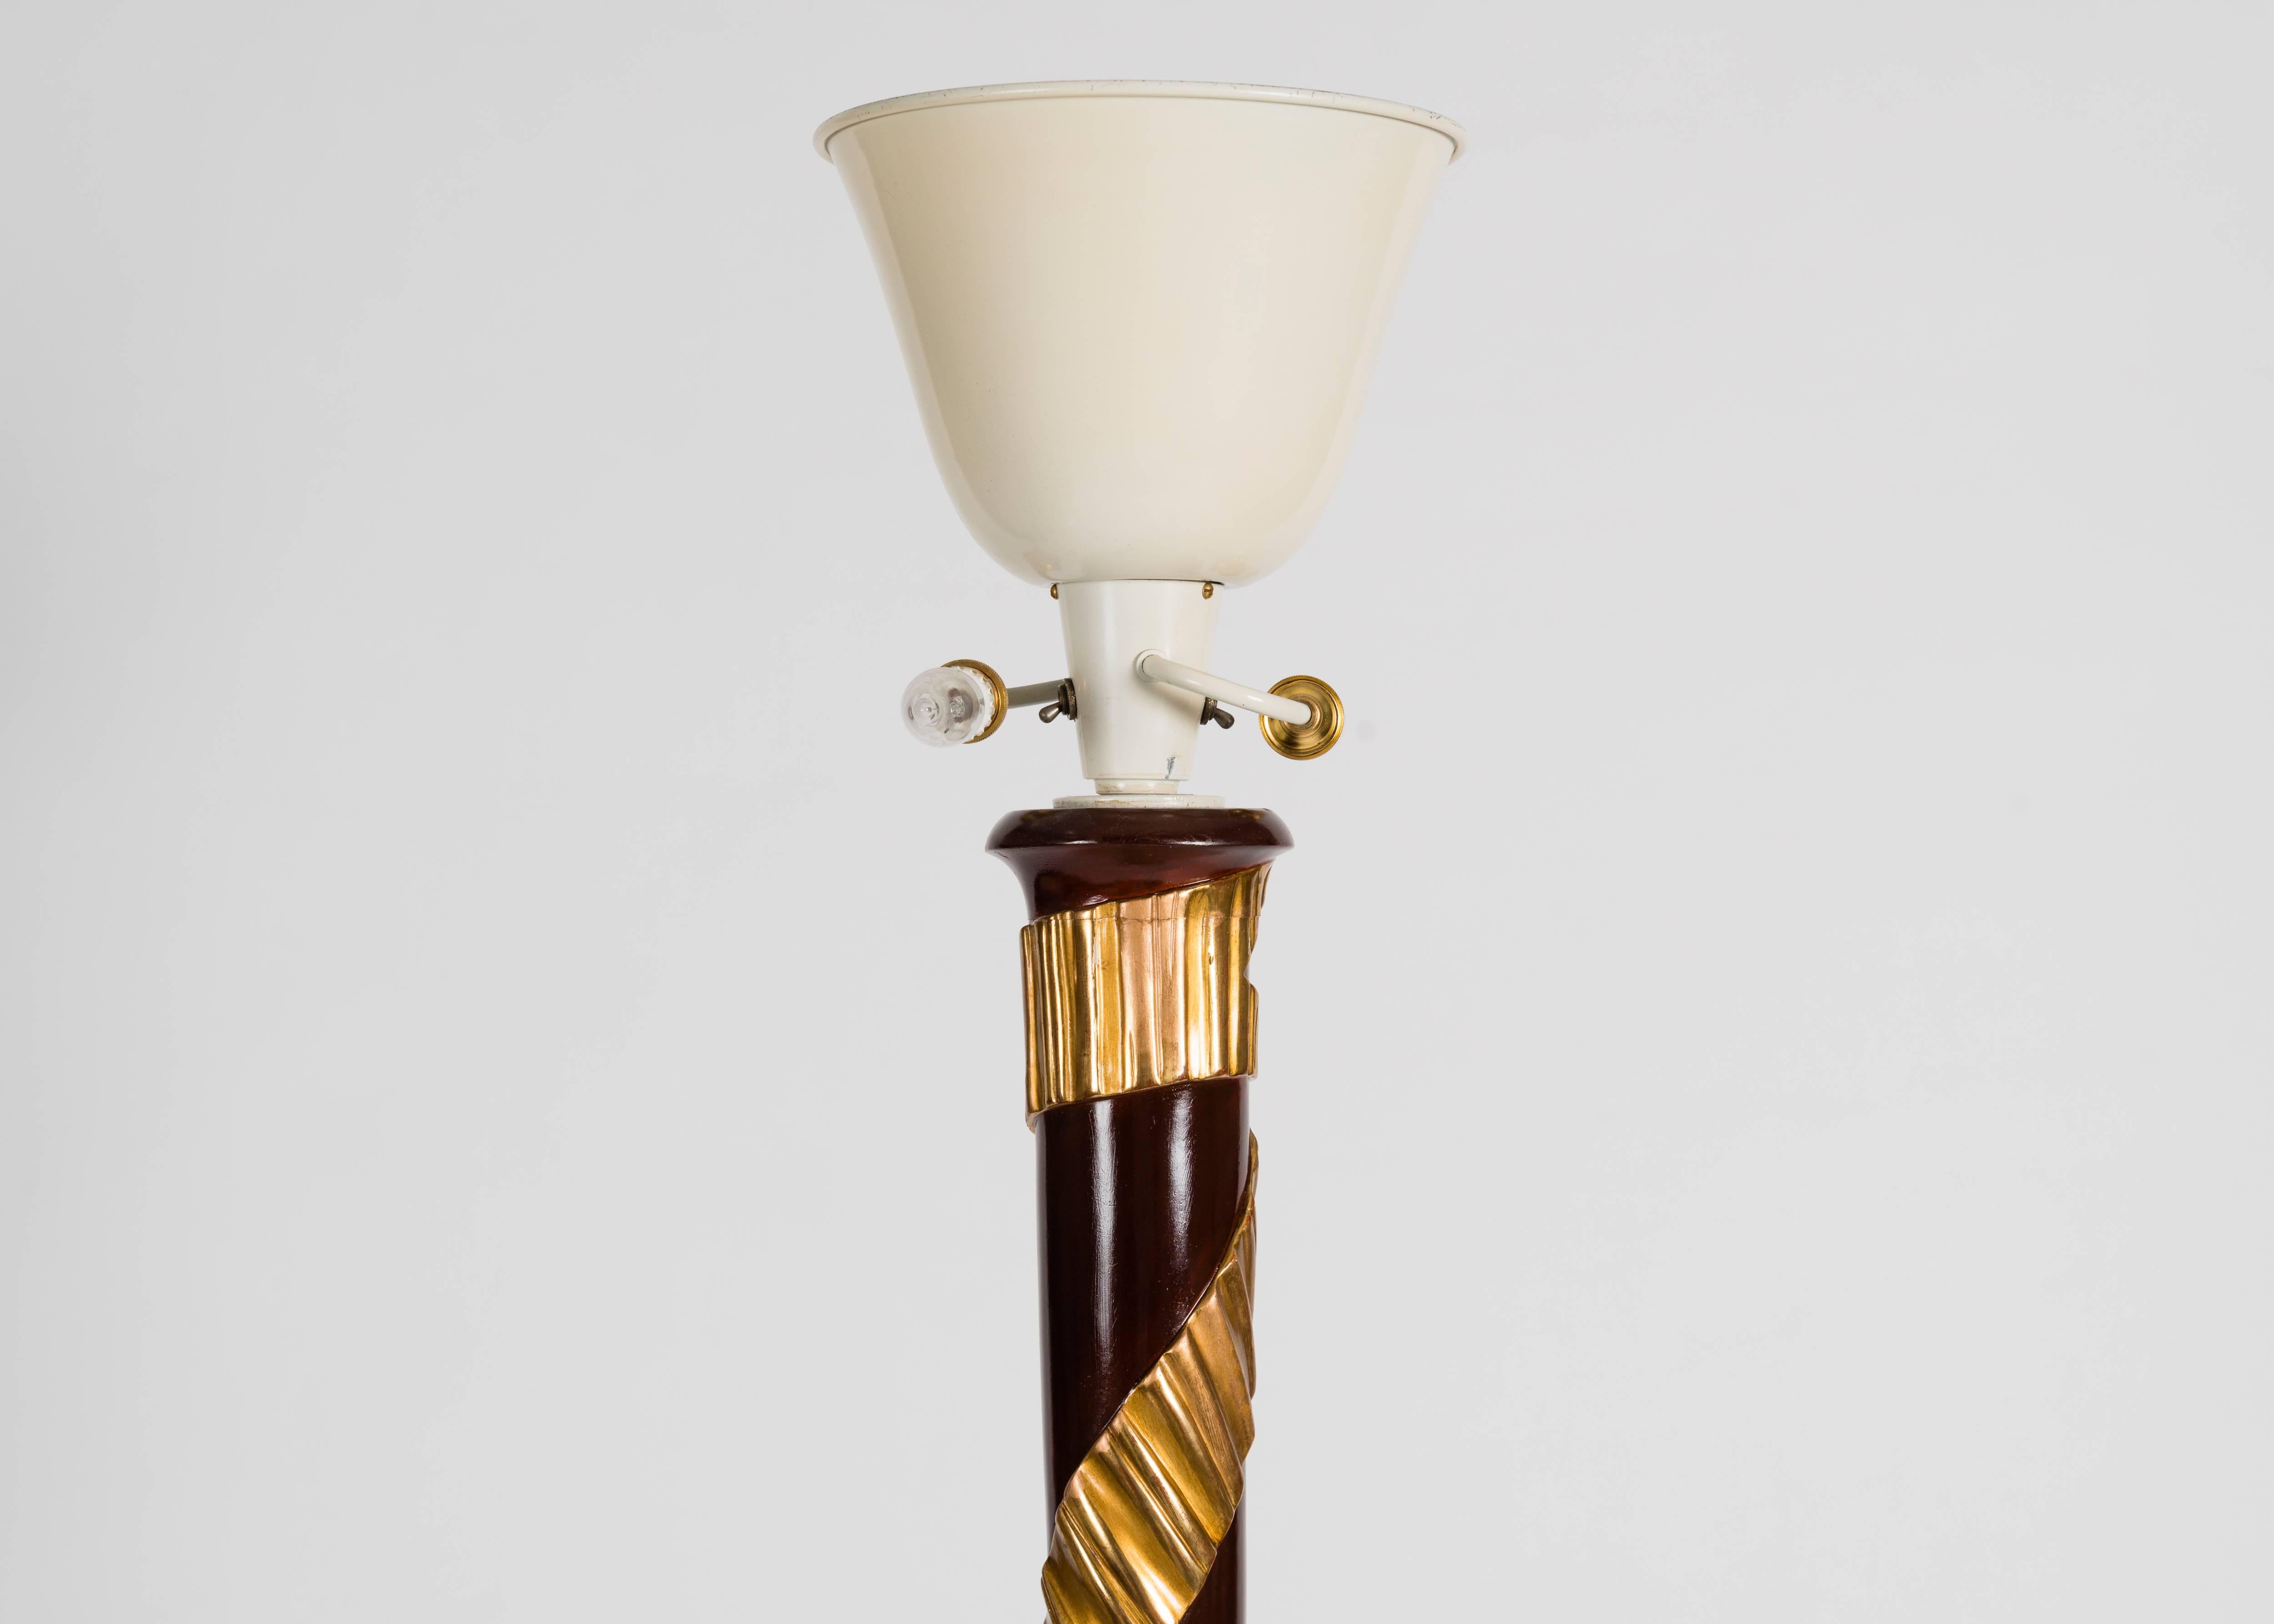 Numbered: 20939

A luxuriant floor lamp with a tapered body that terminates in a disk-shaped base at its bottom. Around the central column of the lamp wraps a ribbon motif, achieved by gilt detailing.